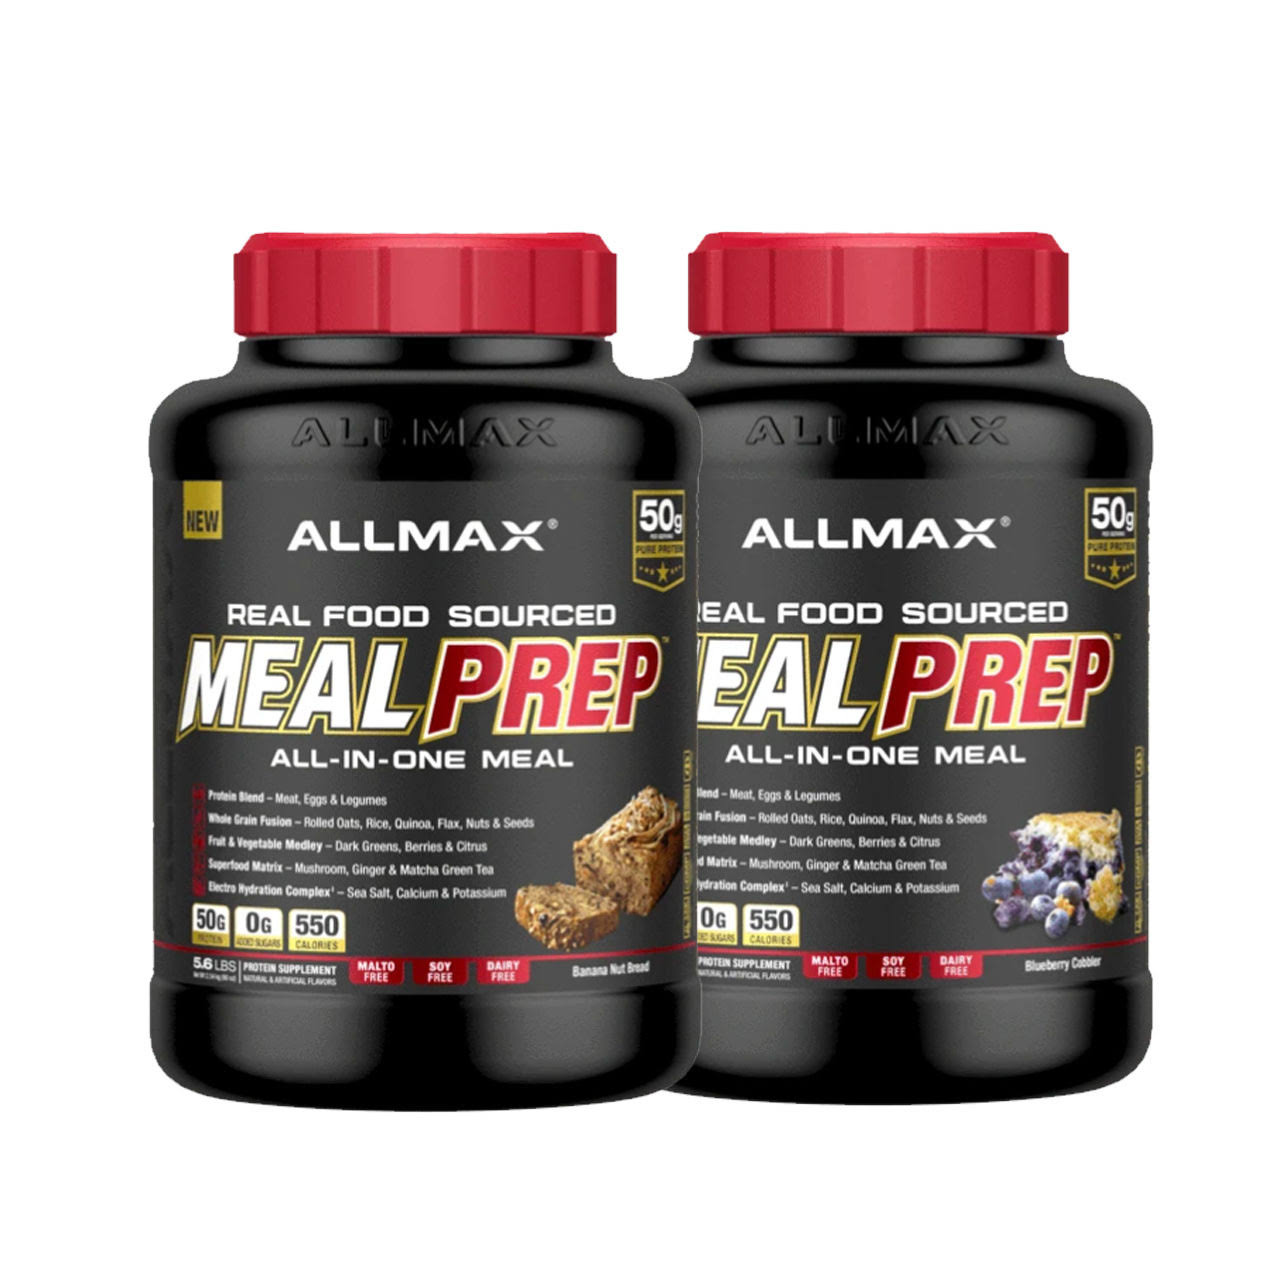 Allmax Meal Prep All-in-One Meal 5.6lb